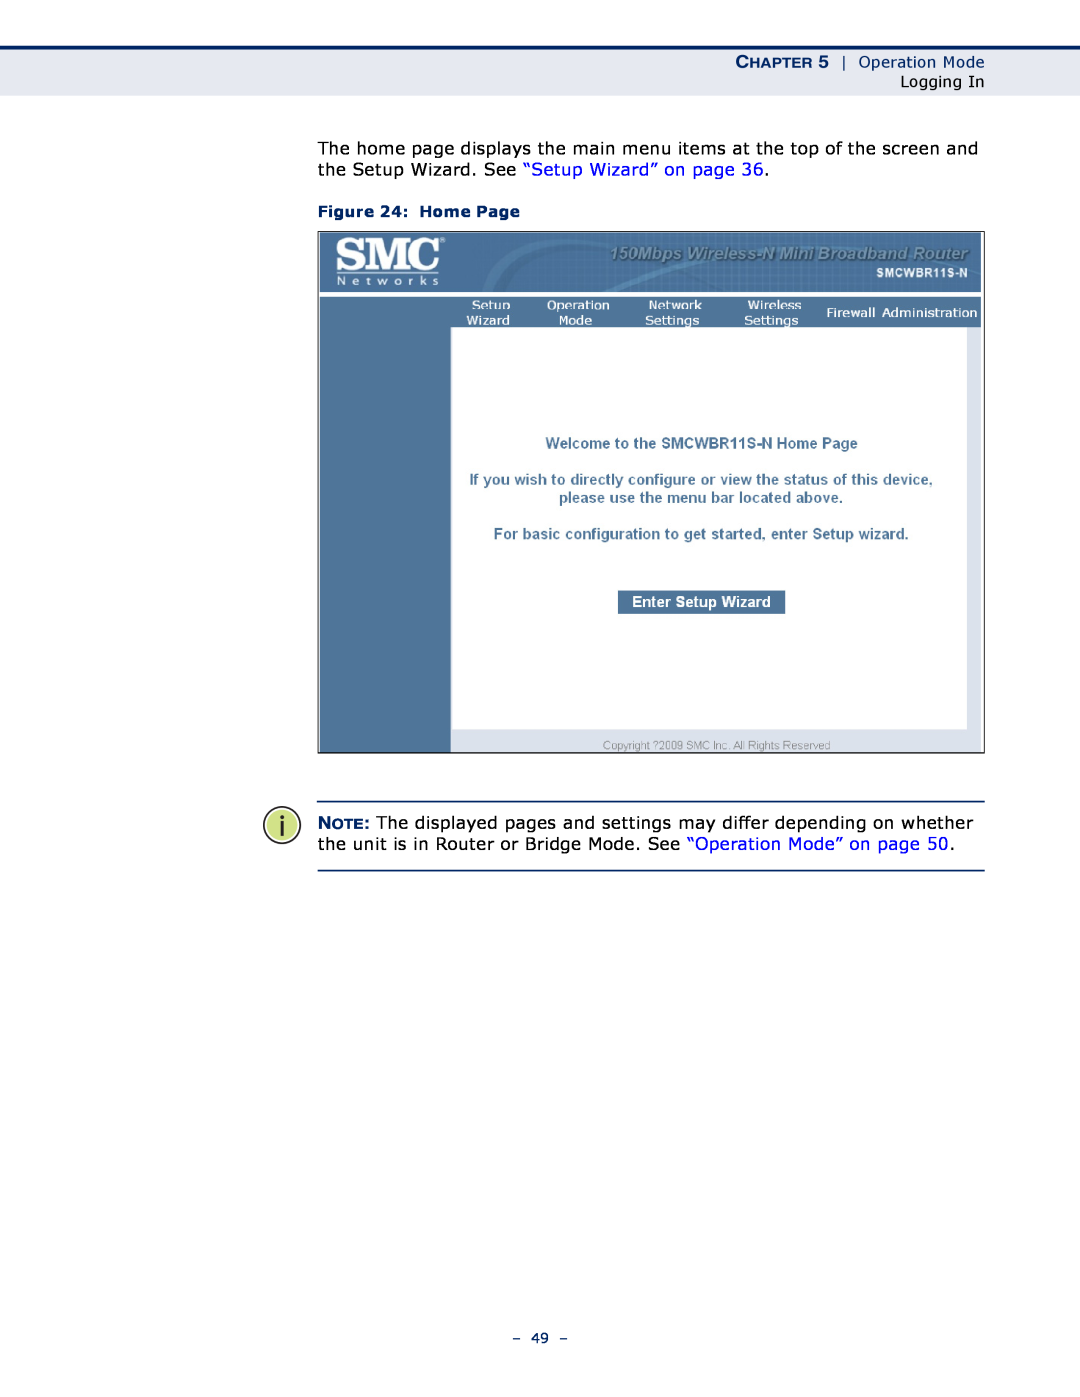 SMC Networks SMCWBR11S-N manual Home Page 